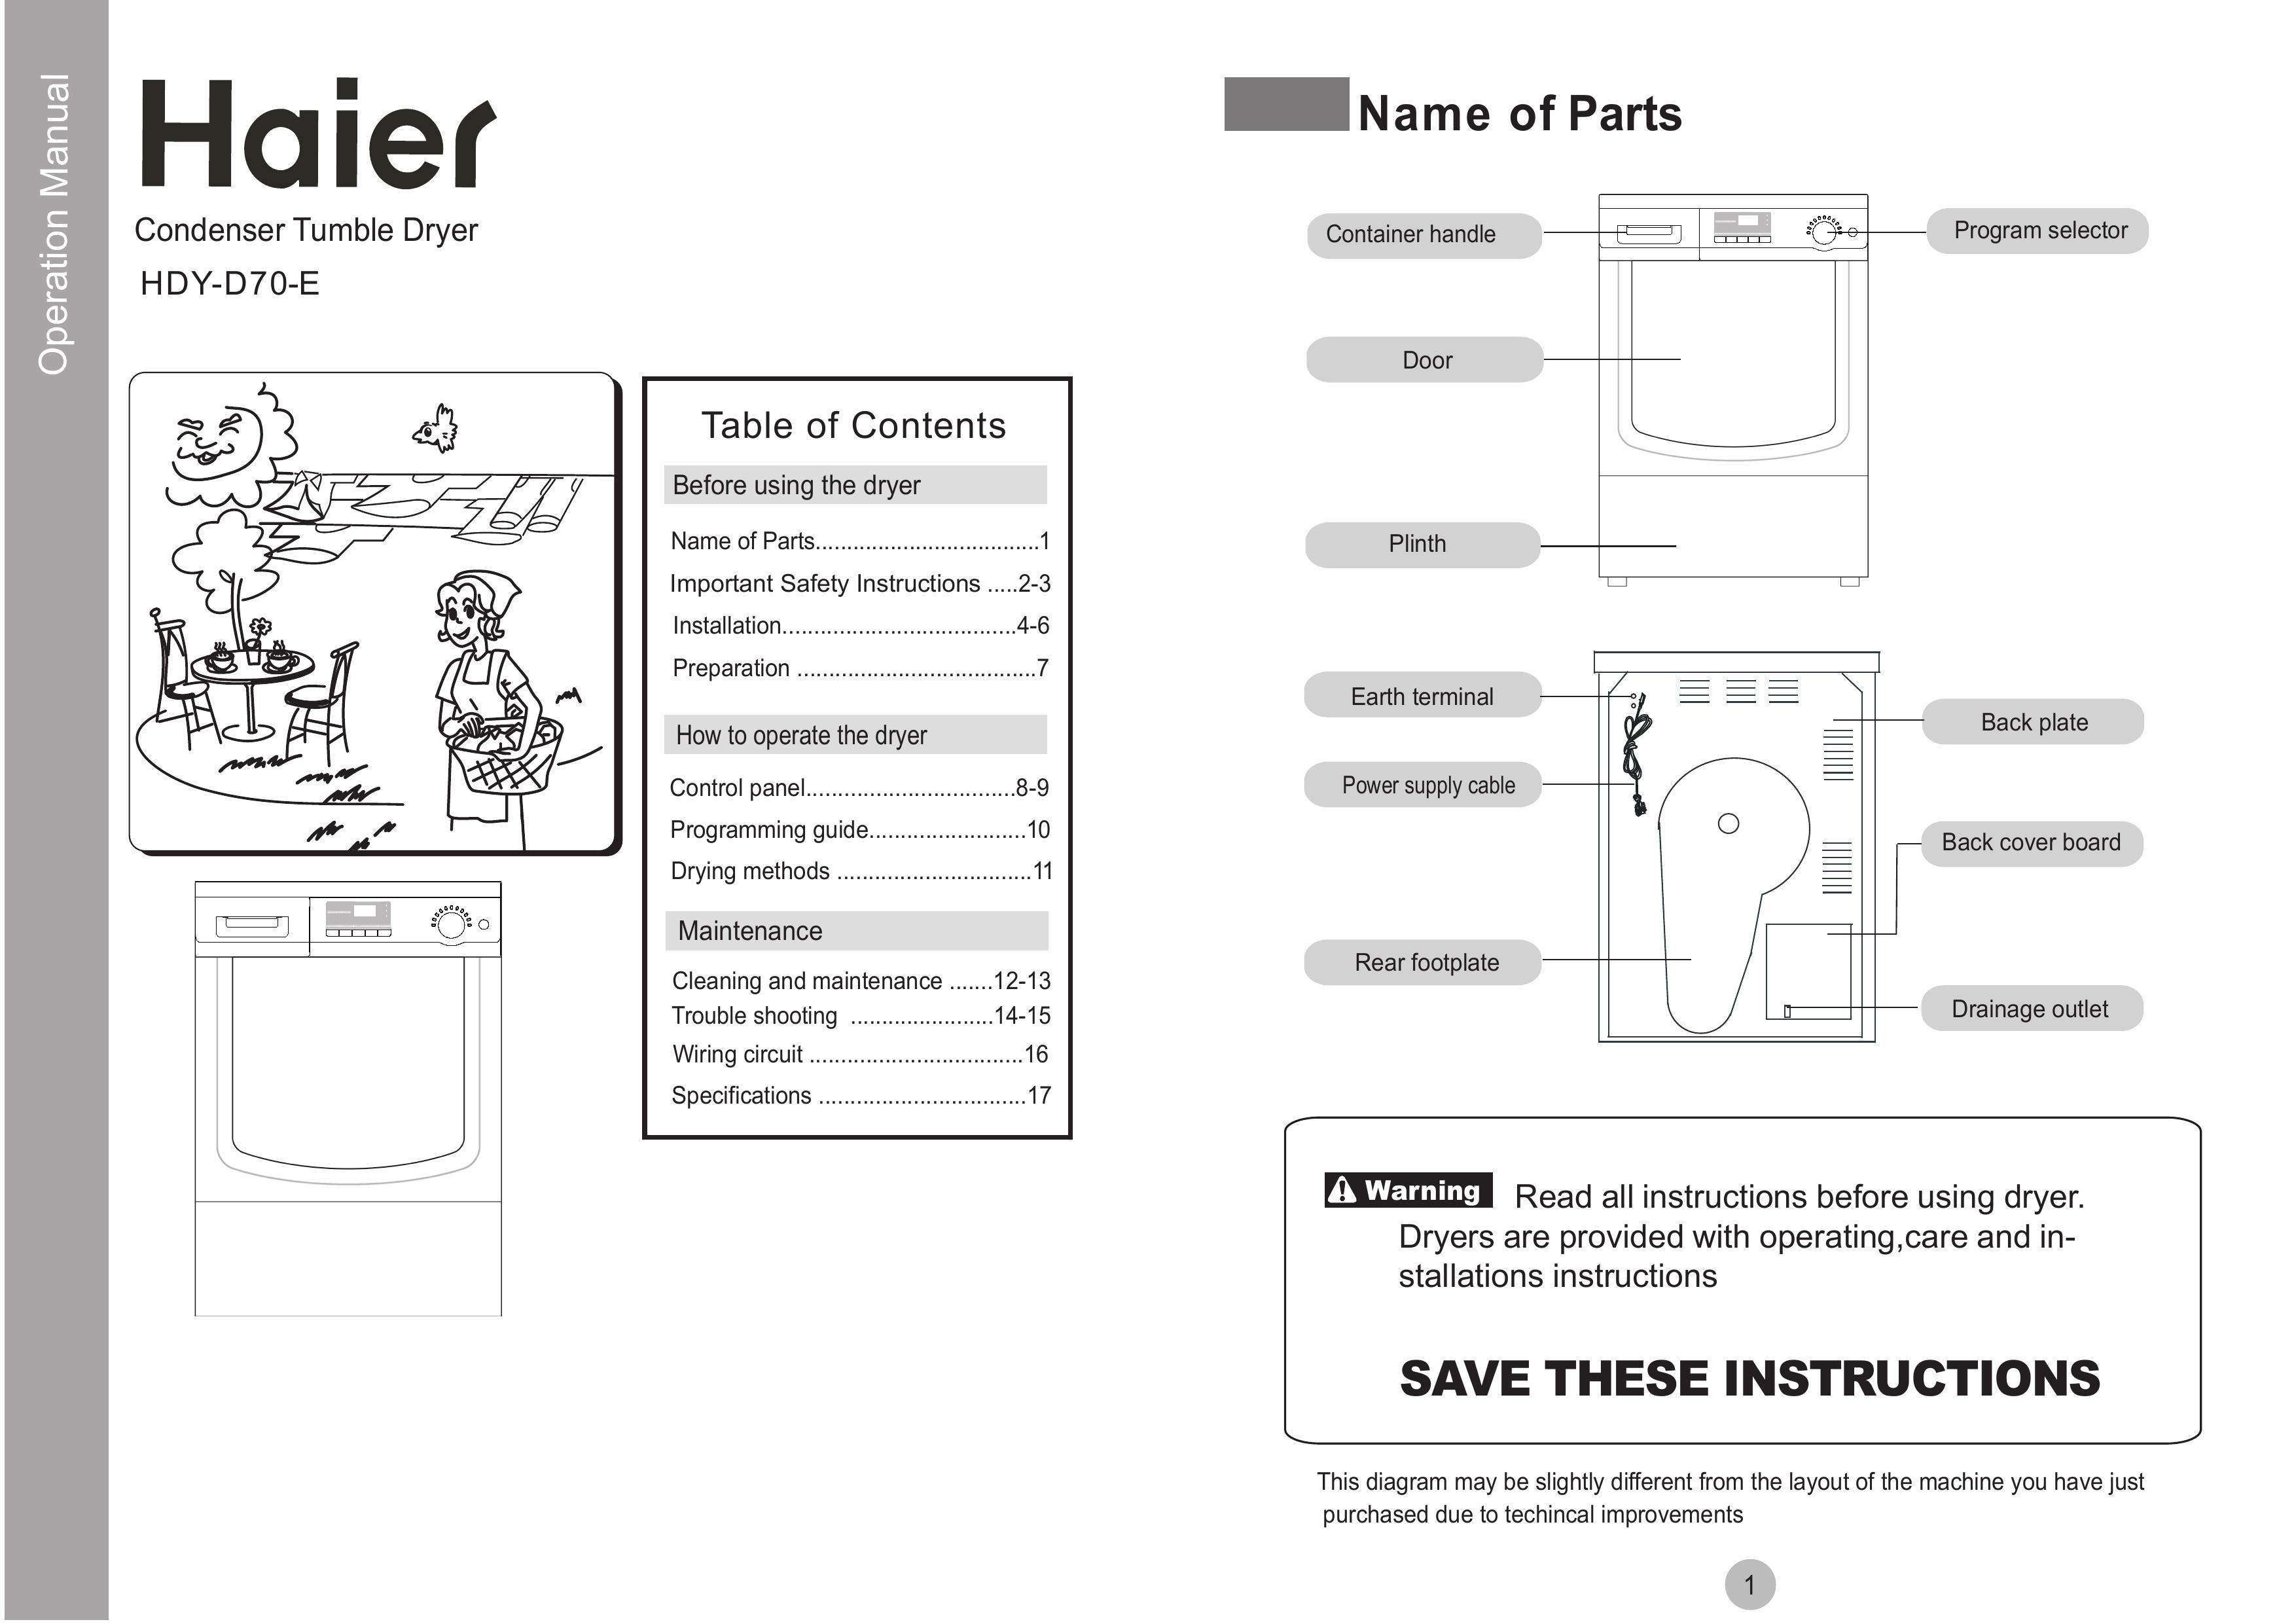 Haier HDY-D70-E Clothes Dryer User Manual